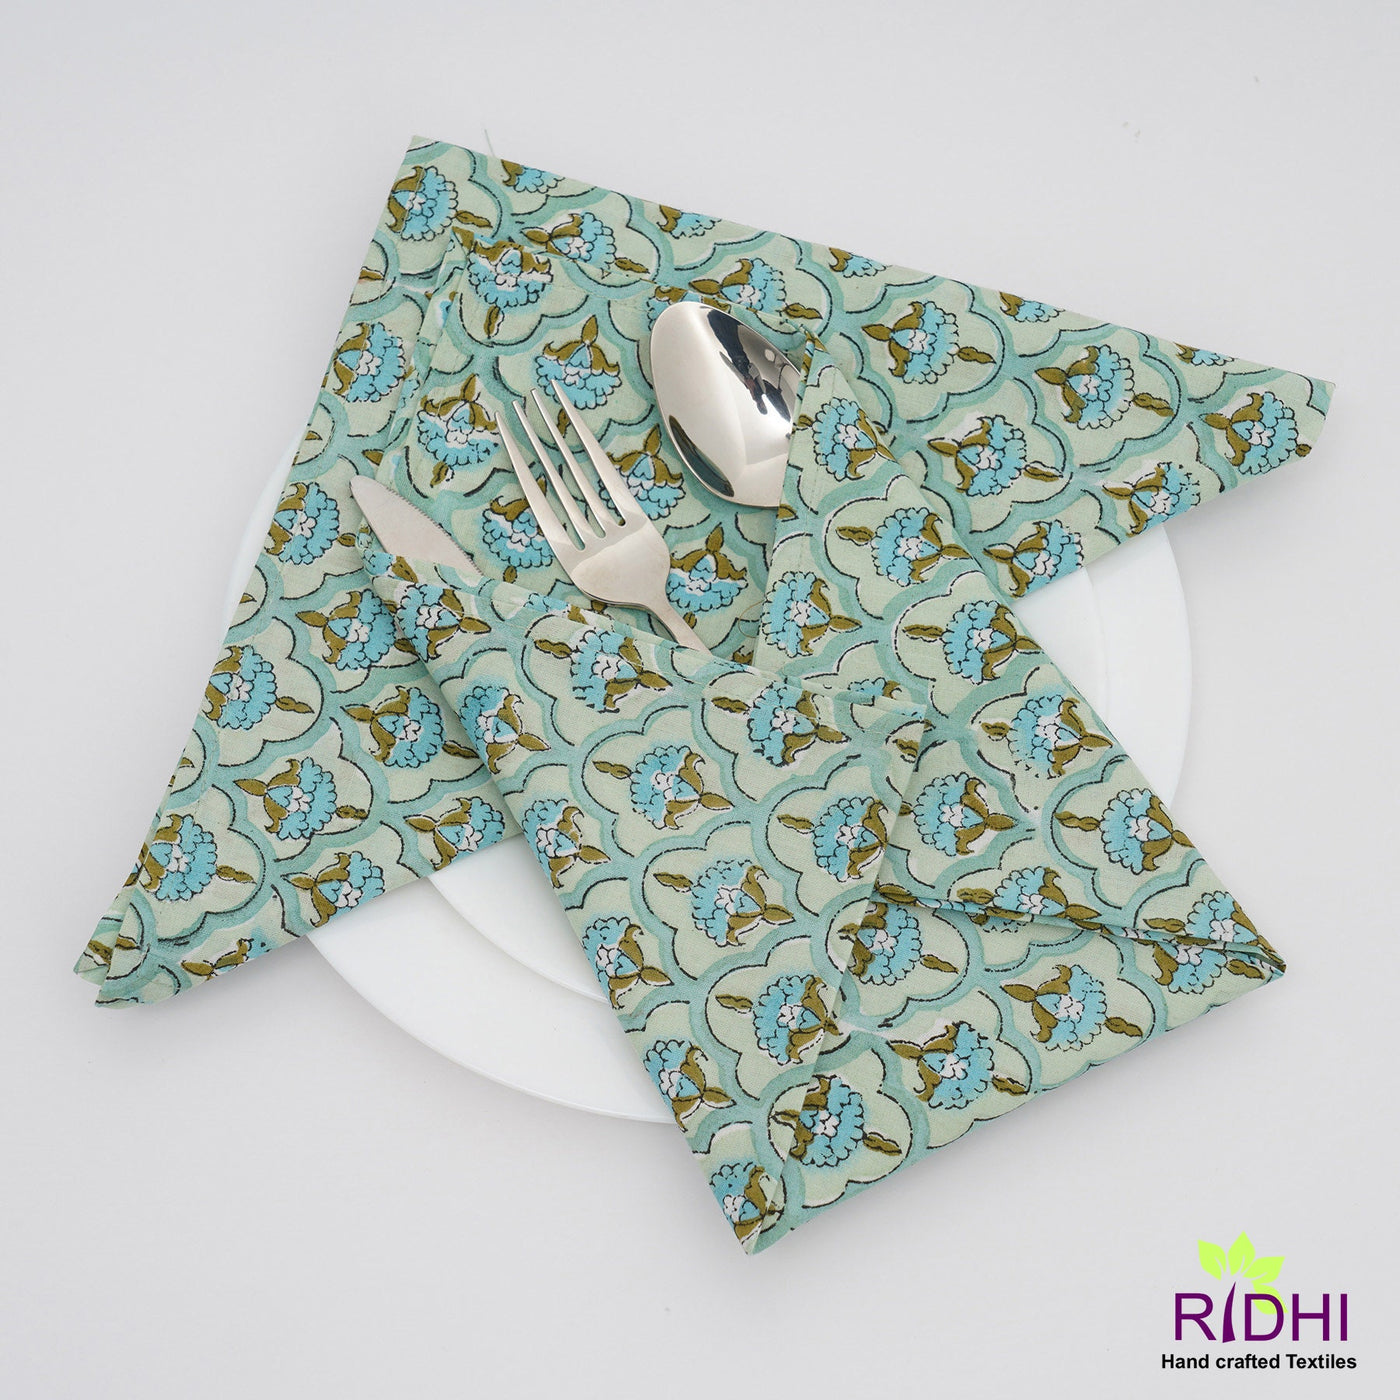 Sage and Fern Green, Sapphire Blue Indian Hand Block Floral Printed Pure Cotton Cloth Napkins, 18x18"-Cocktail Napkins, 20x20"- Dinner Napkins